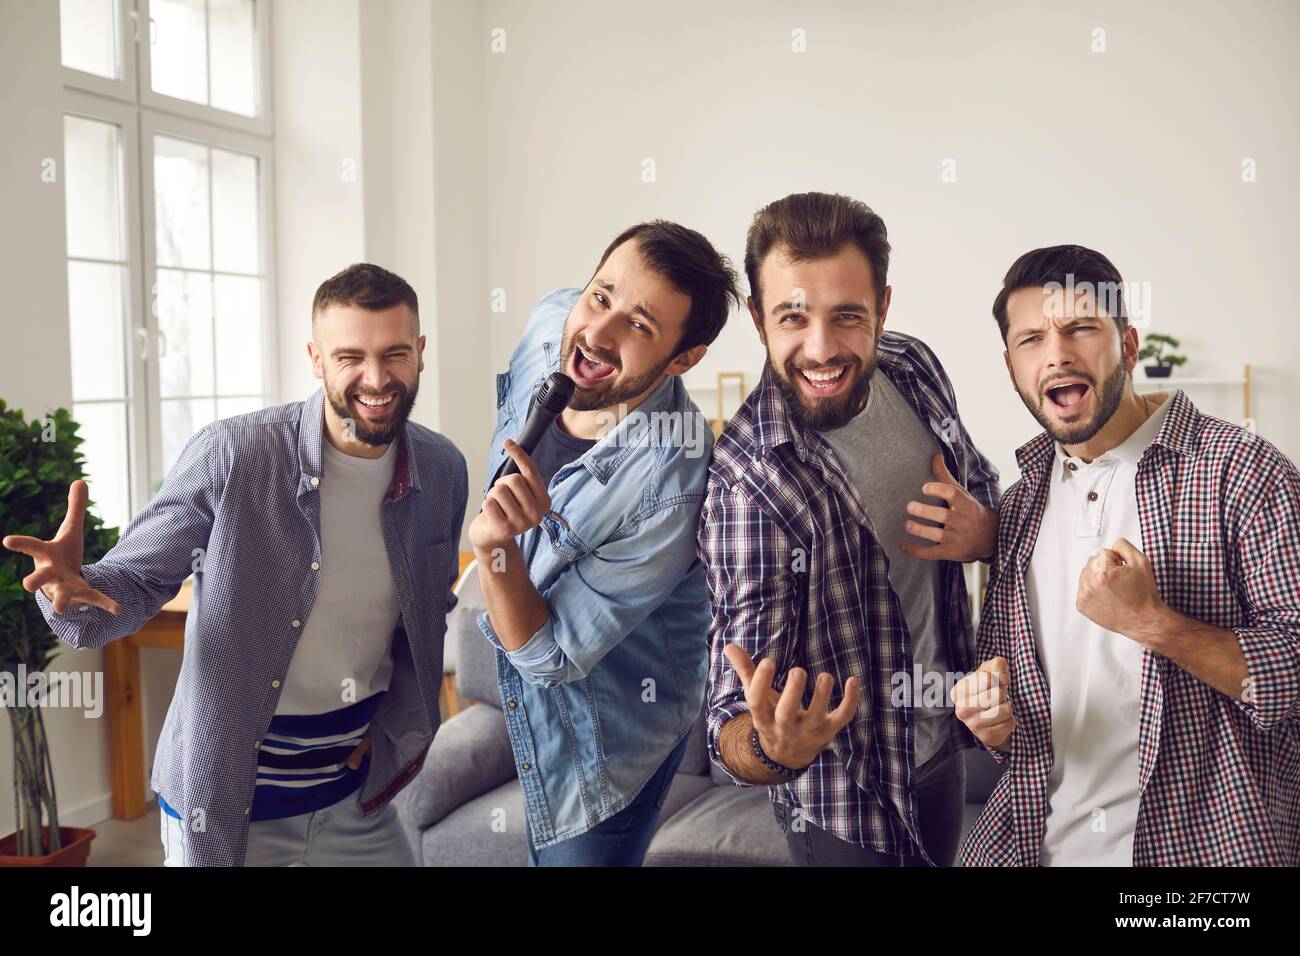 Home party and having fun for male company concept Stock Photo